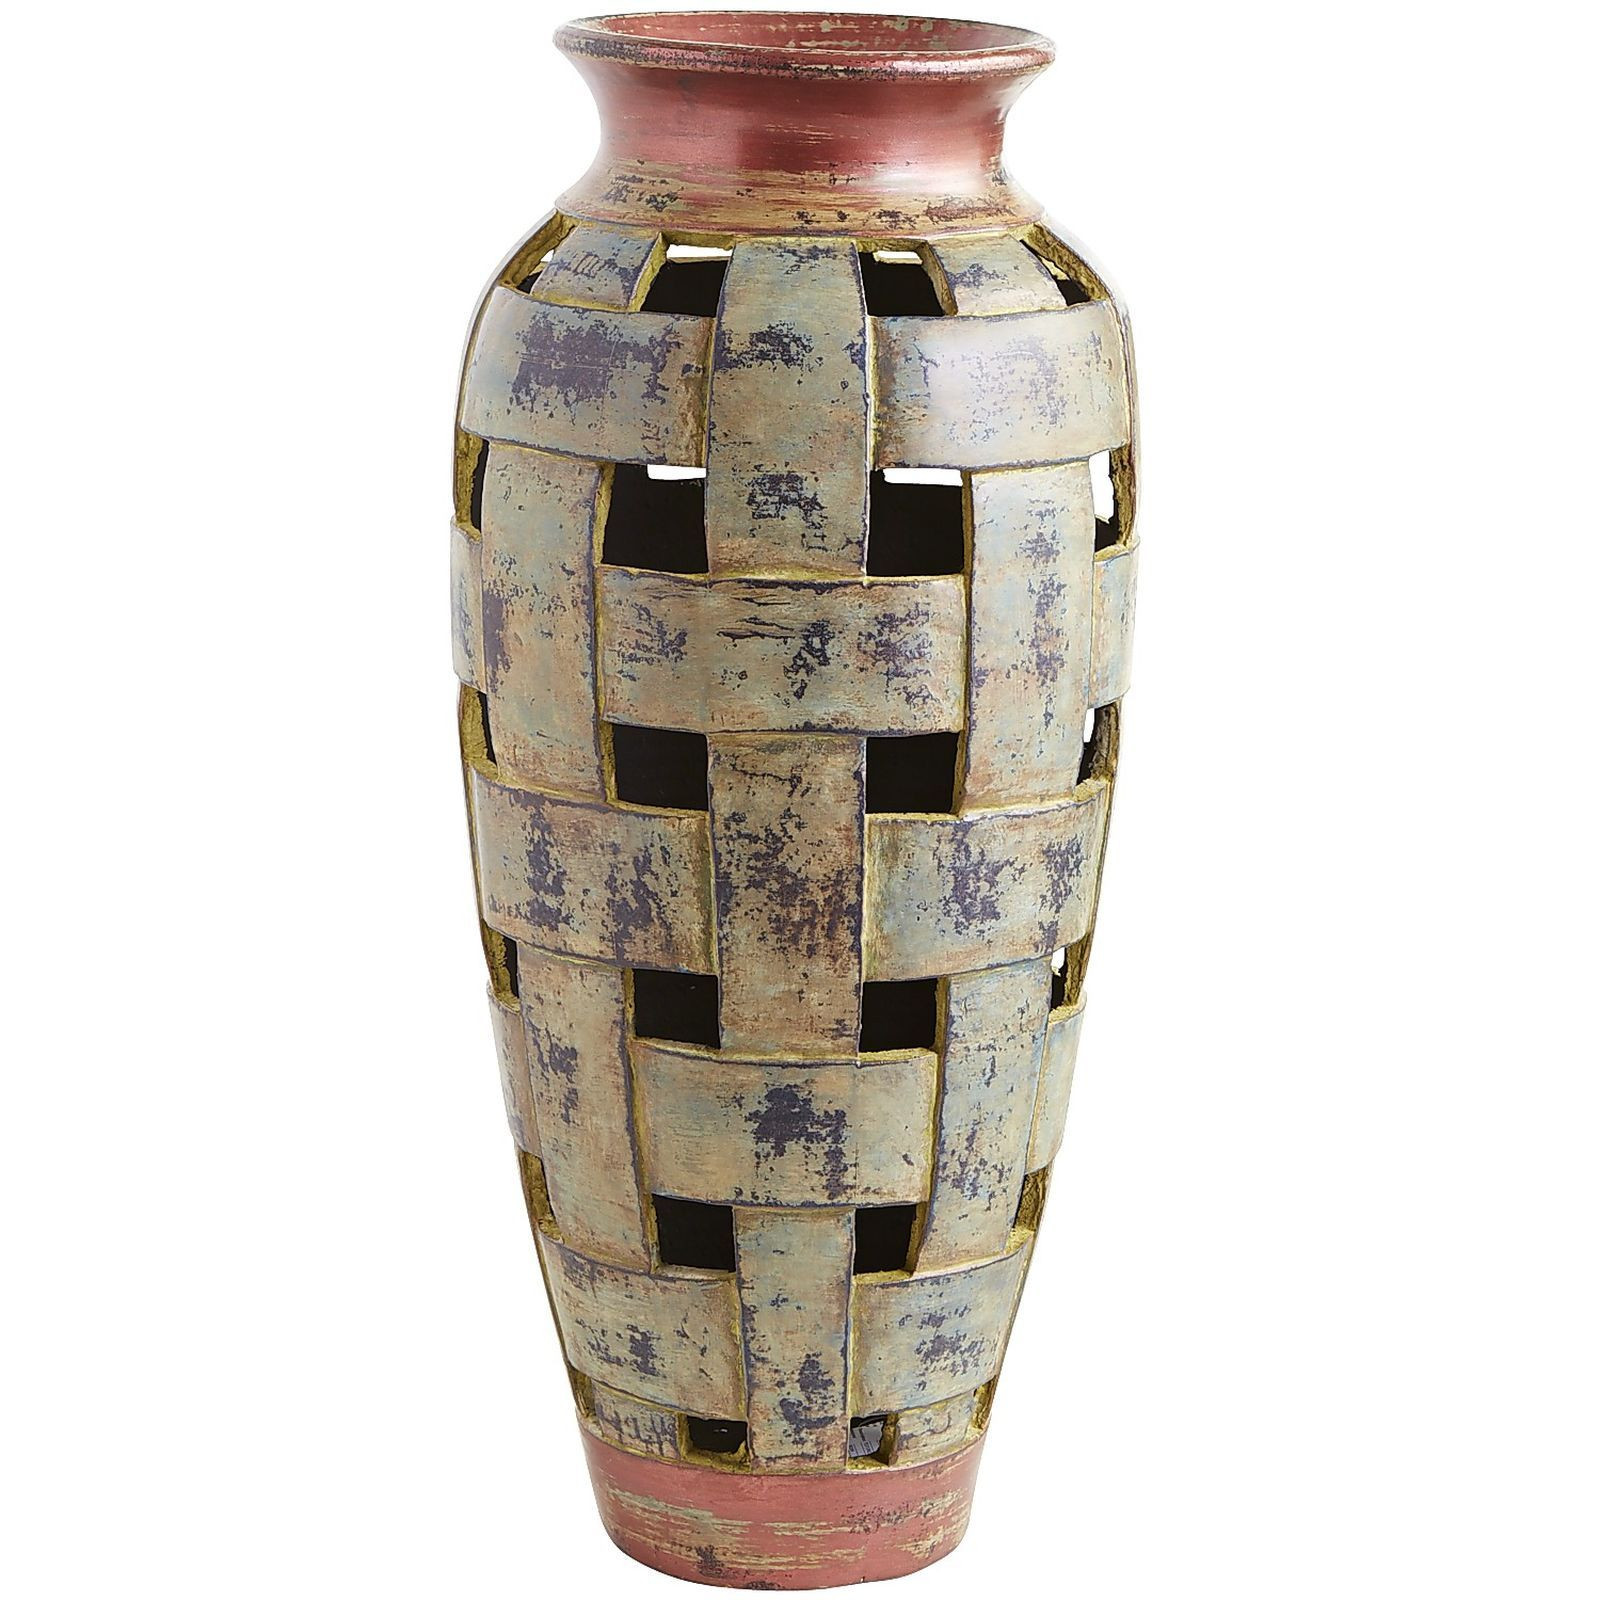 24 Great Large Terracotta Floor Vases 2023 free download large terracotta floor vases of terracotta open weave floor vase drinks pinterest terracotta throughout in no time this grand terracotta vase will weave its way into classic status no matter